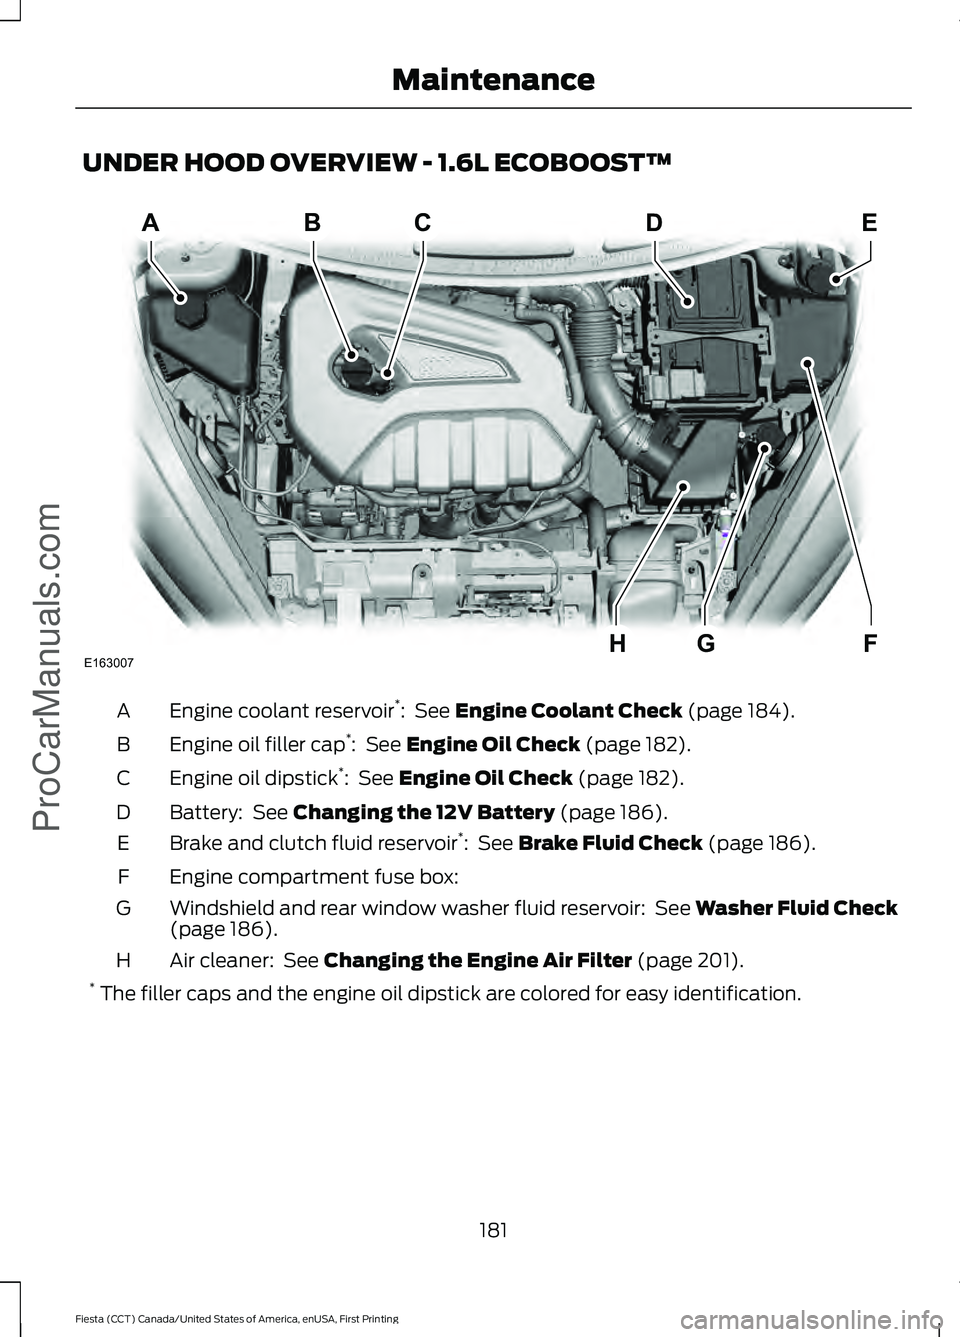 FORD FIESTA 2016  Owners Manual UNDER HOOD OVERVIEW - 1.6L ECOBOOST™
Engine coolant reservoir
*
:  See Engine Coolant Check (page 184).
A
Engine oil filler cap *
: 
 See Engine Oil Check (page 182).
B
Engine oil dipstick *
: 
 See